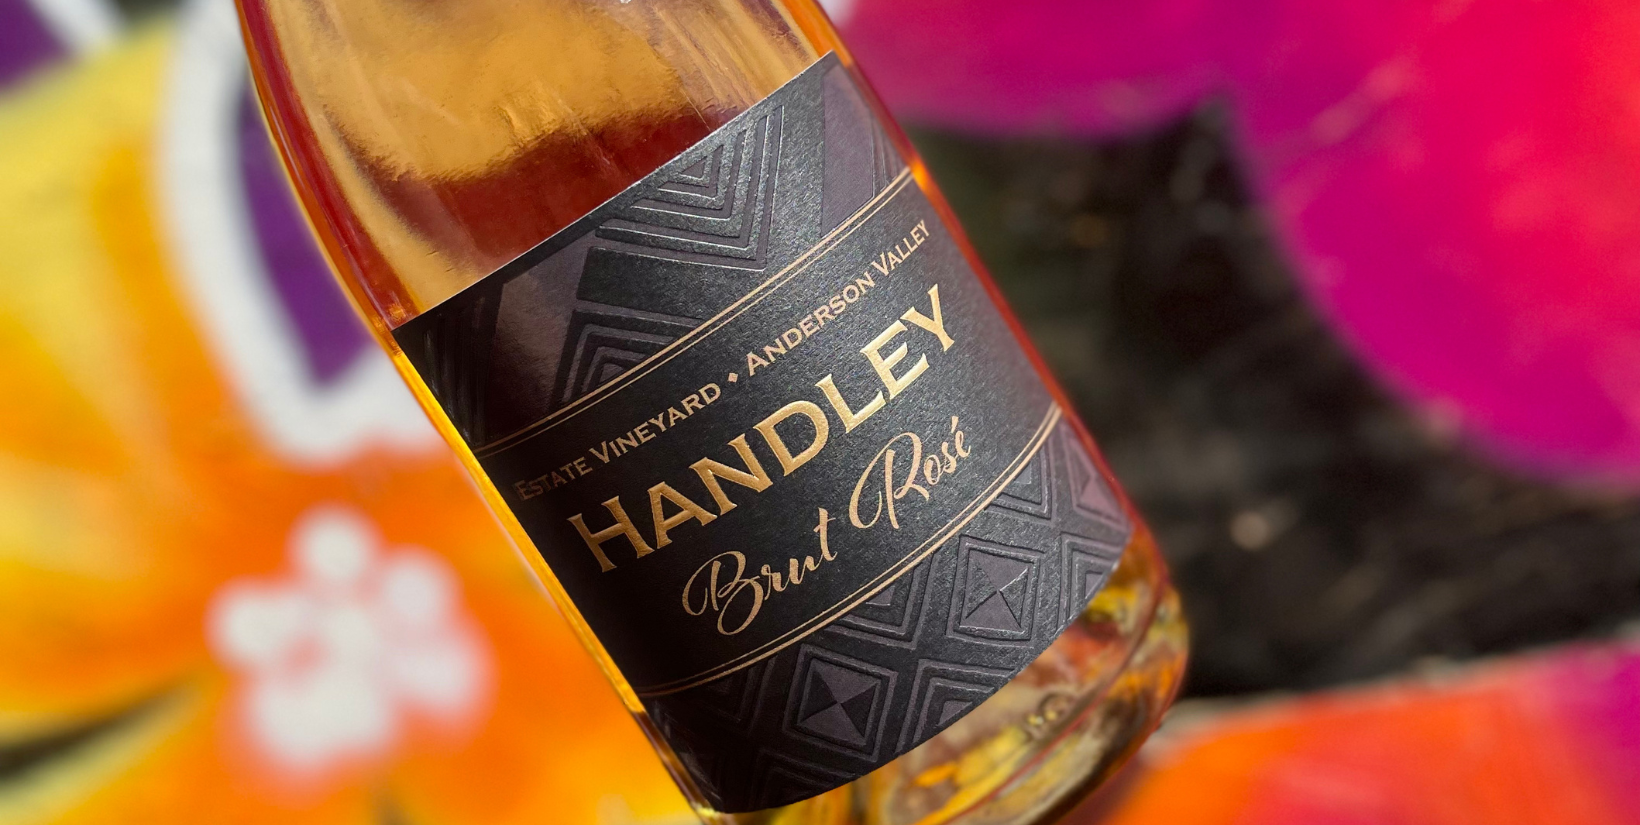 Since it’s impossible to choose just one wine at Noble Riot, check out this bonus bottle: Handley Cellar’s Estate Vineyard Brut Rosé 2016. This stunning wine comes to Dever through the collection by Master Sommelier, Doug Krenik. A mentor of mine and a legend in the Colorado wine industry, Doug Krenik Selections brings an array of small-production artisan wines to restaurants and retail shops around the state.

The wine is a gorgeous copper hue made from a blend of Pinot Noir and Chardonnay in Mendocino’s Anderson Valley. It’s packed with flavors of kiwi, citrus, and freshly baked bread. Absolute perfection on the Noble Riot patio!
